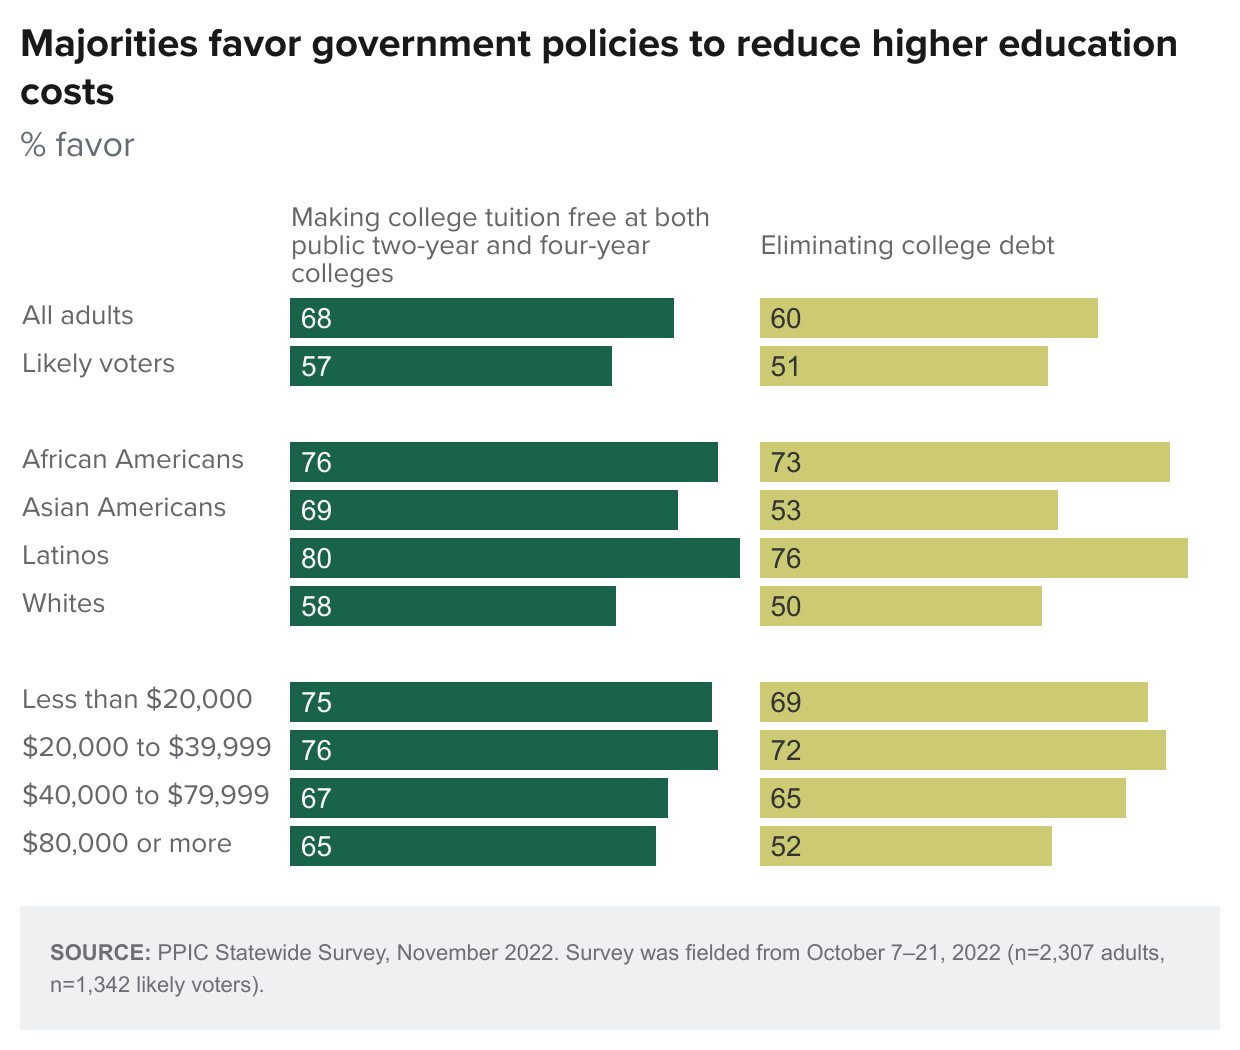 figure - Majorities favor government policies to reduce higher education costs